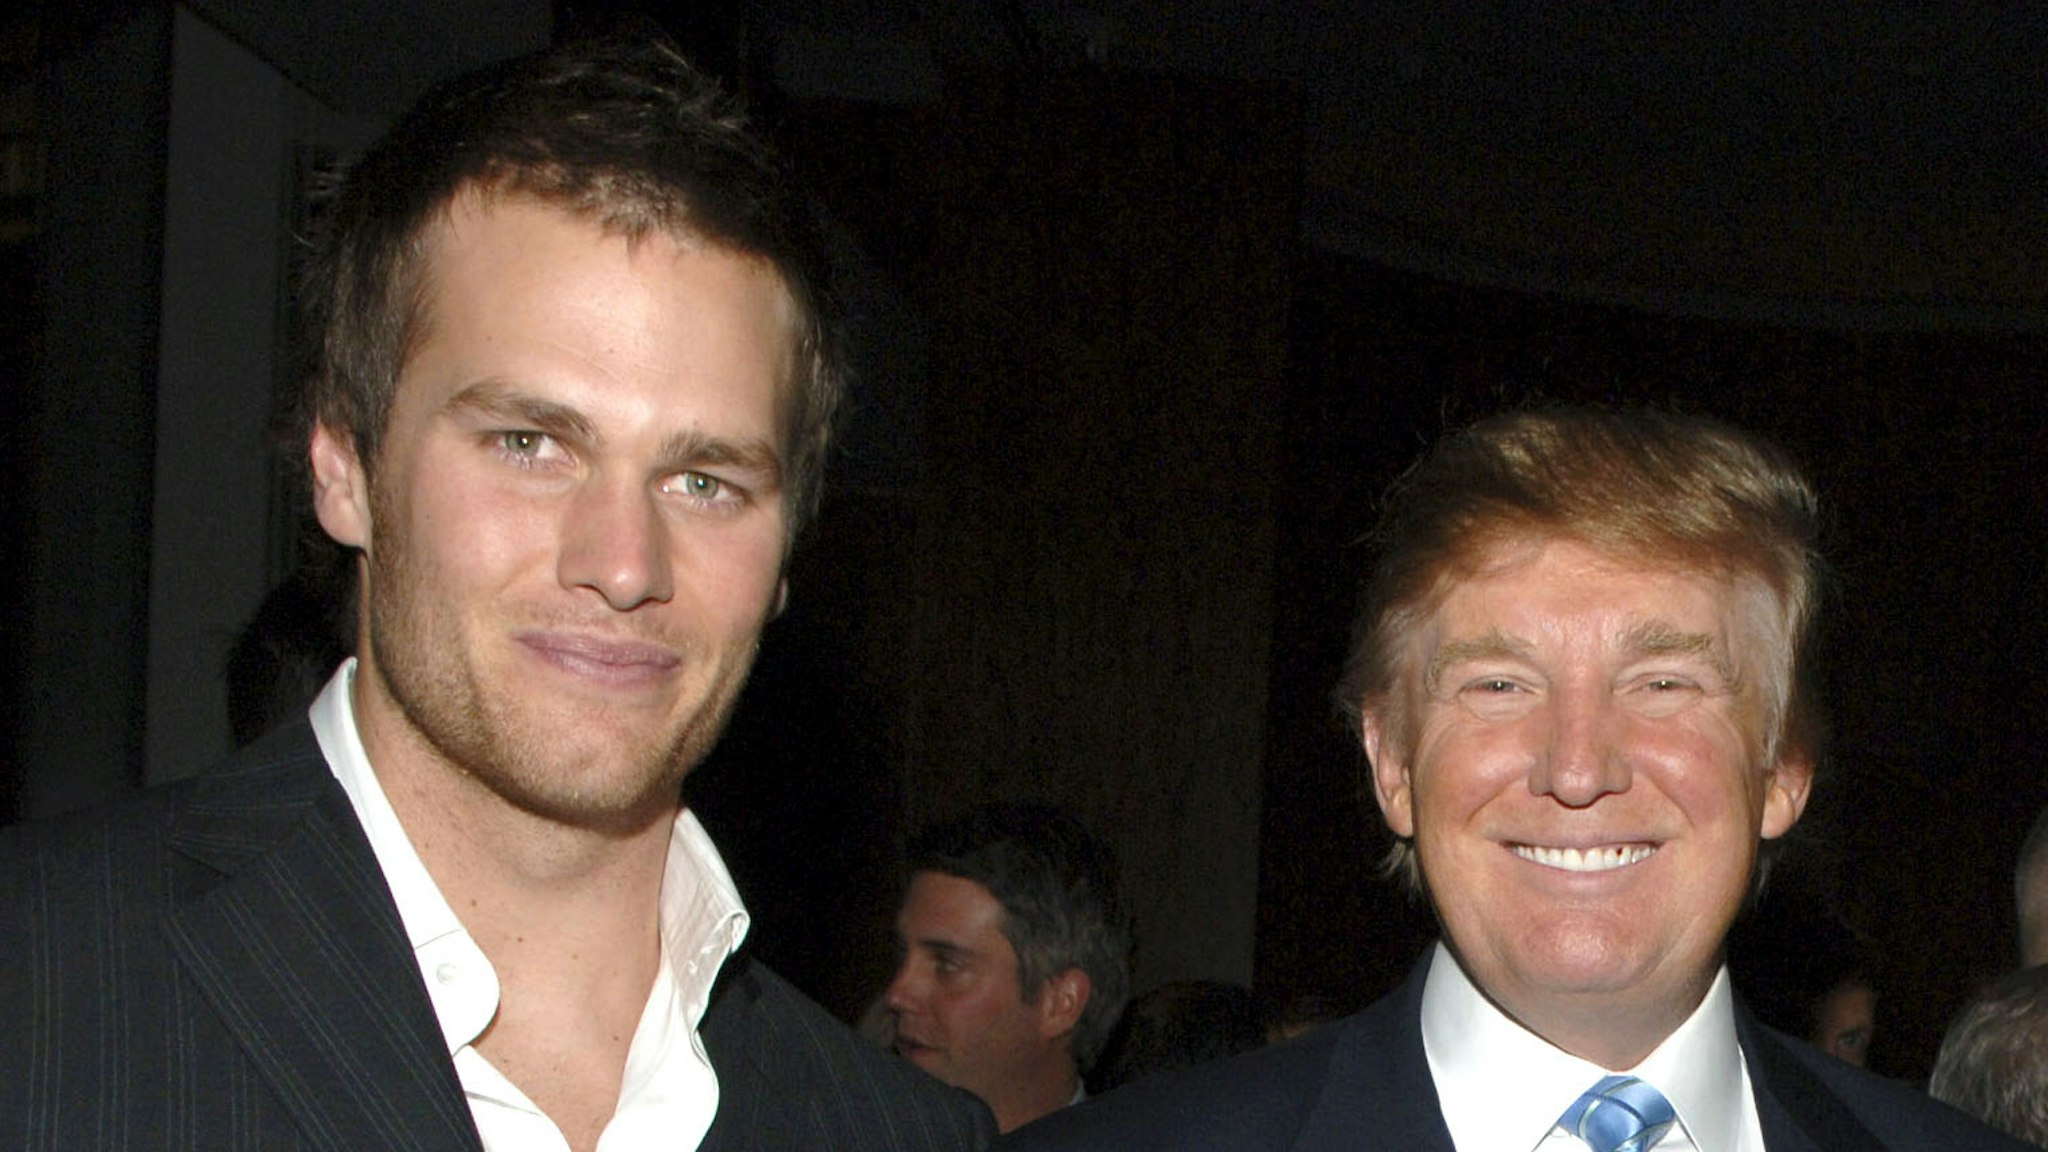 Tom Brady, Sports Illustrated Sportman of the Year, Donald Trump and Terry McDonald, managing editor of SI